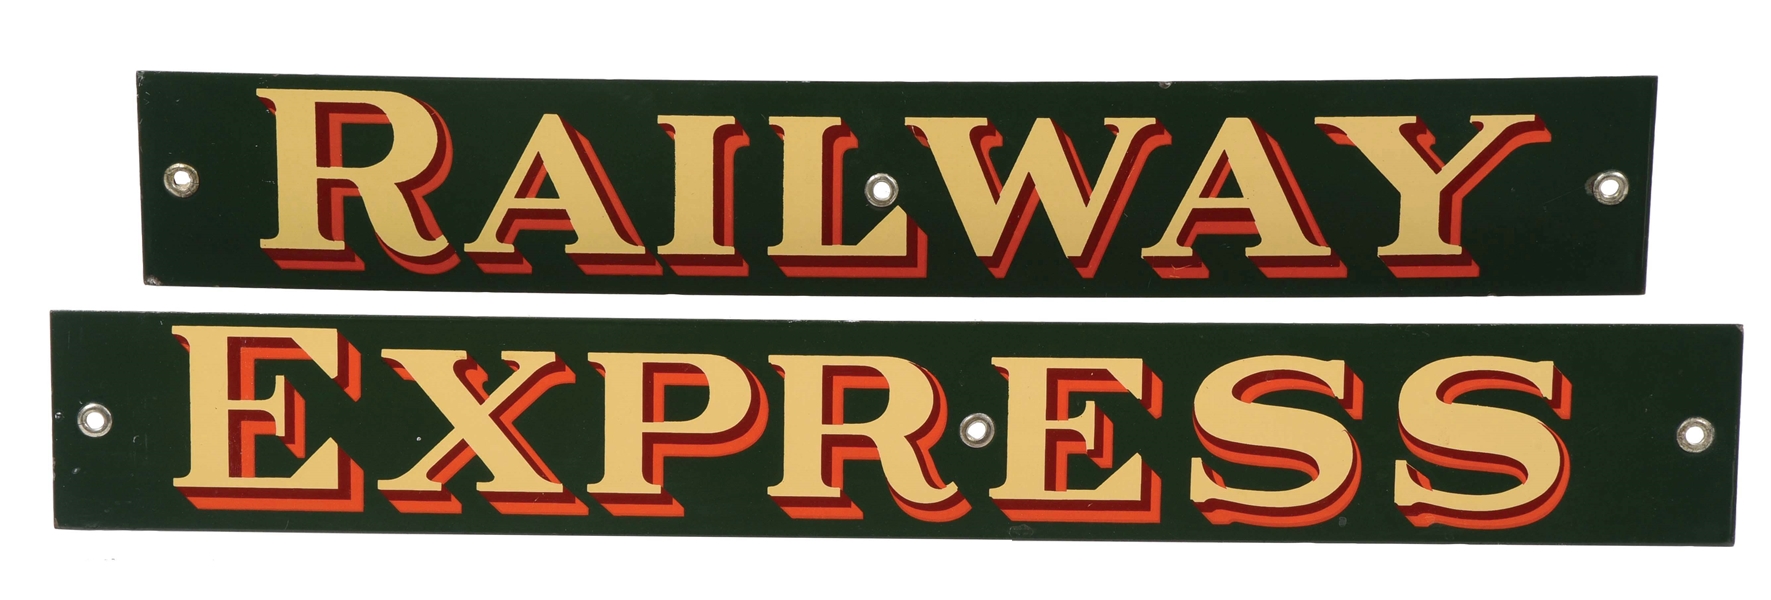 RAILWAY EXPRESS TWO PIECE PORCELAIN SIGN.